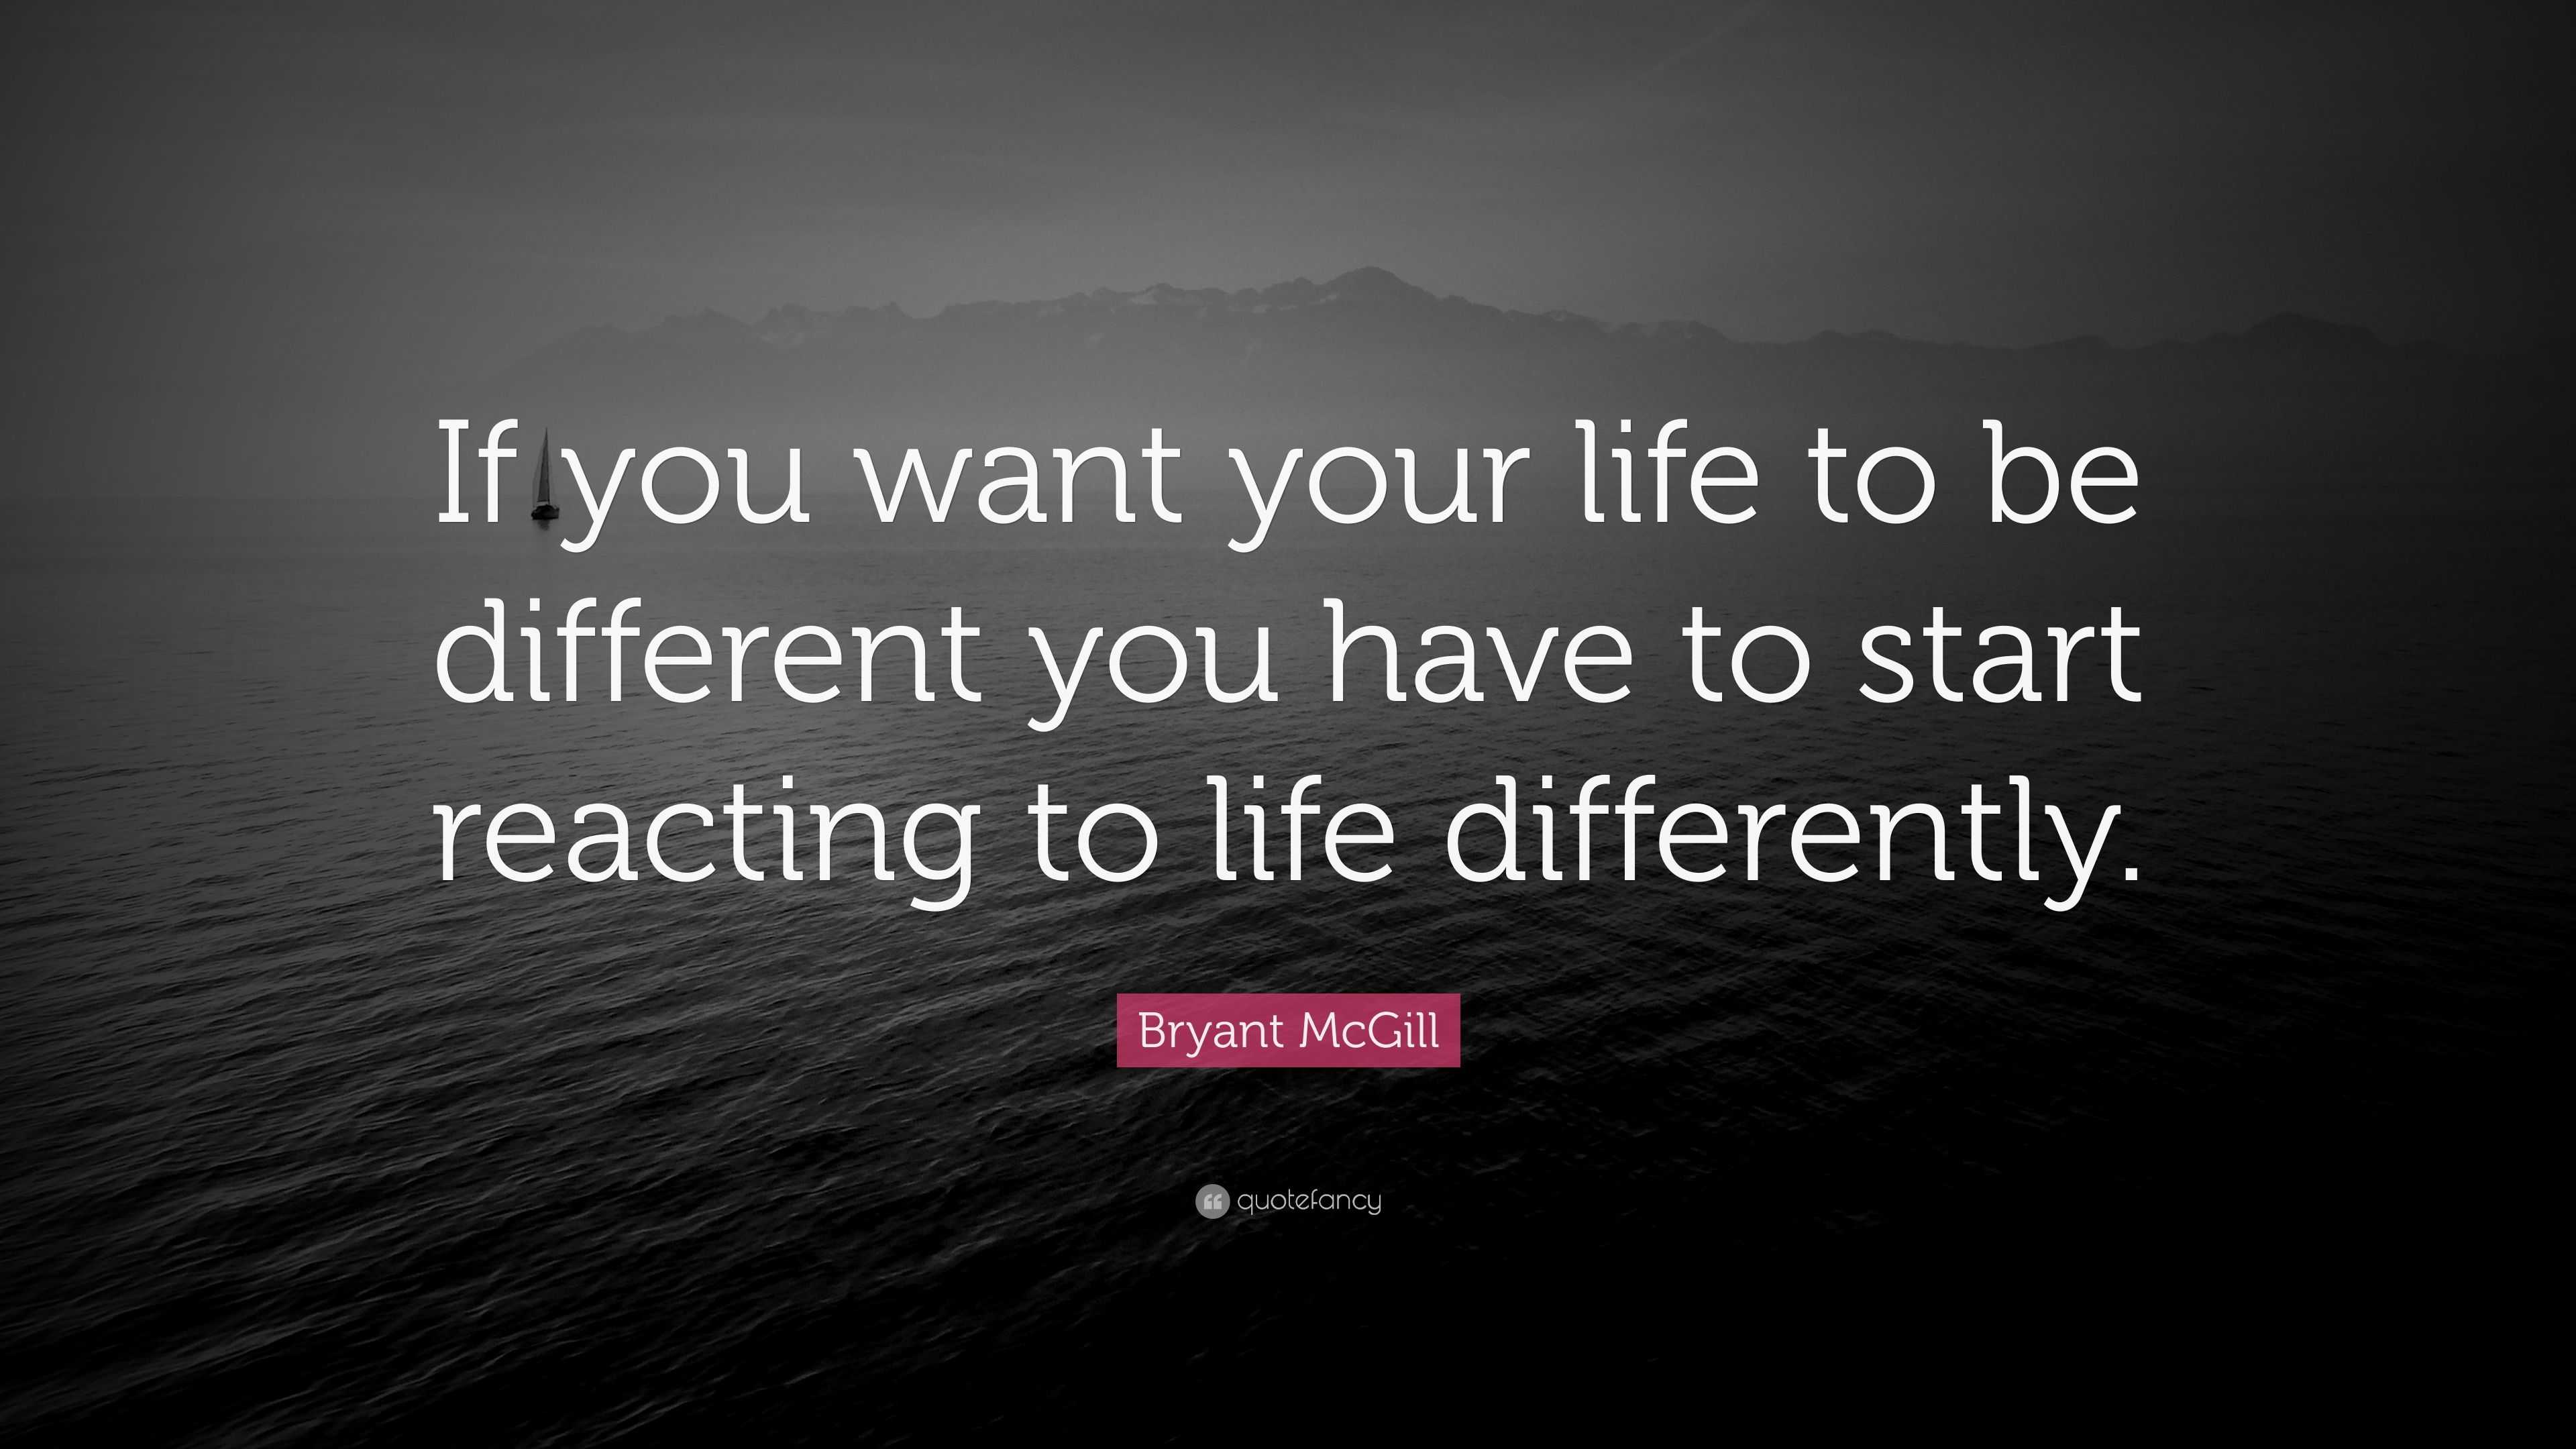 Bryant McGill Quote: “If you want your life to be different you have to ...